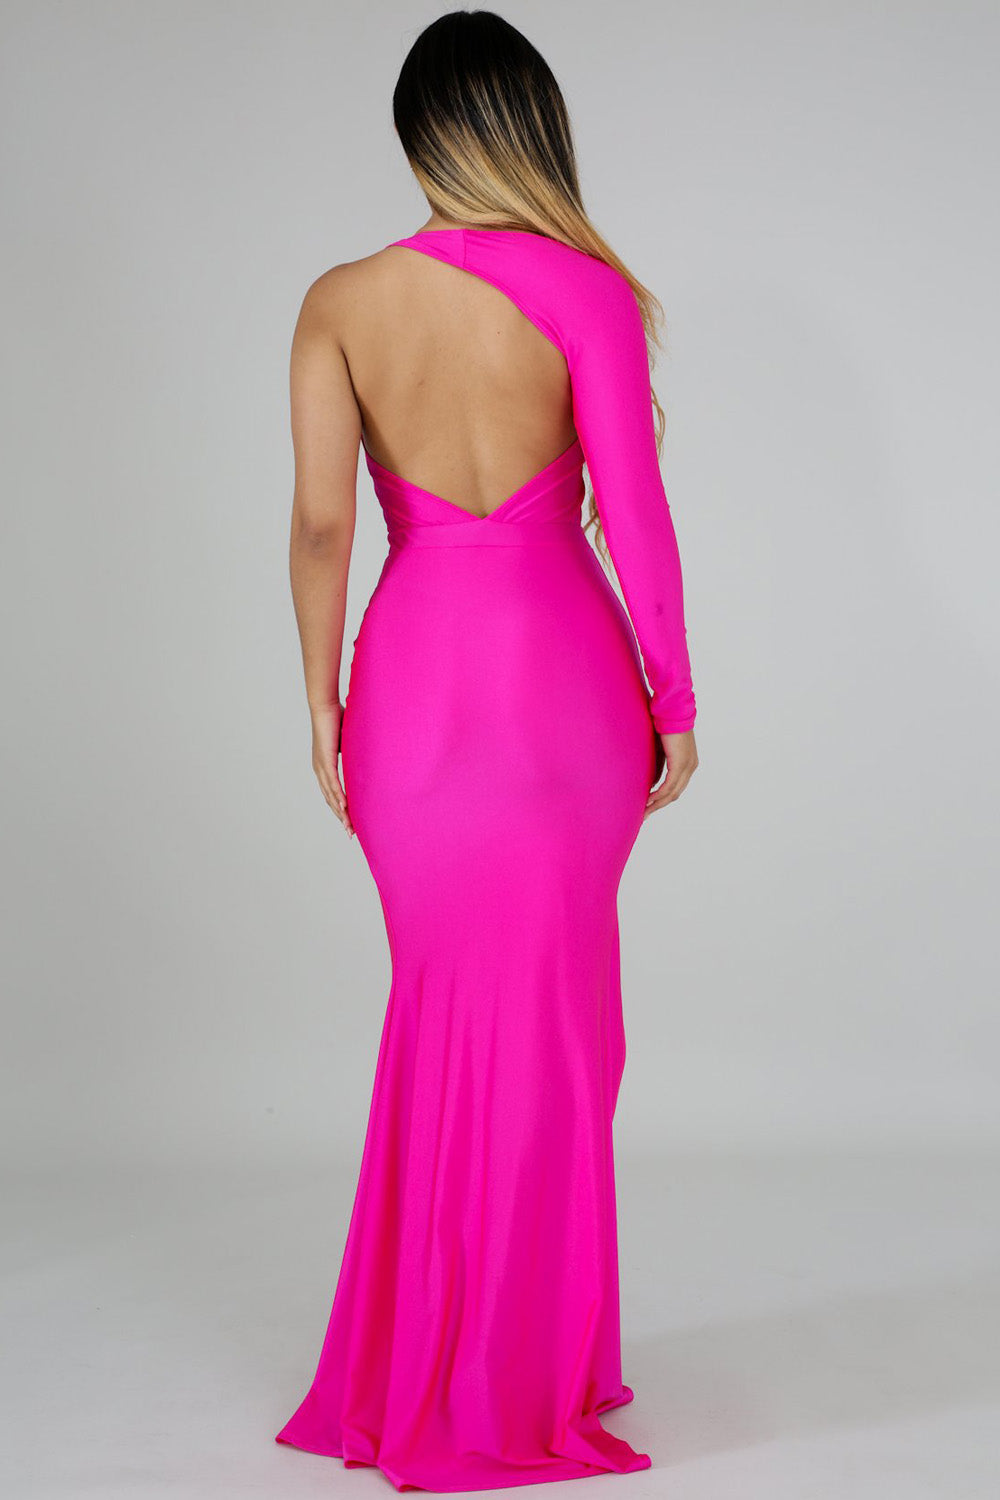 goPals full length hot pink dress with single long sleeve, open back and thigh high slit. 